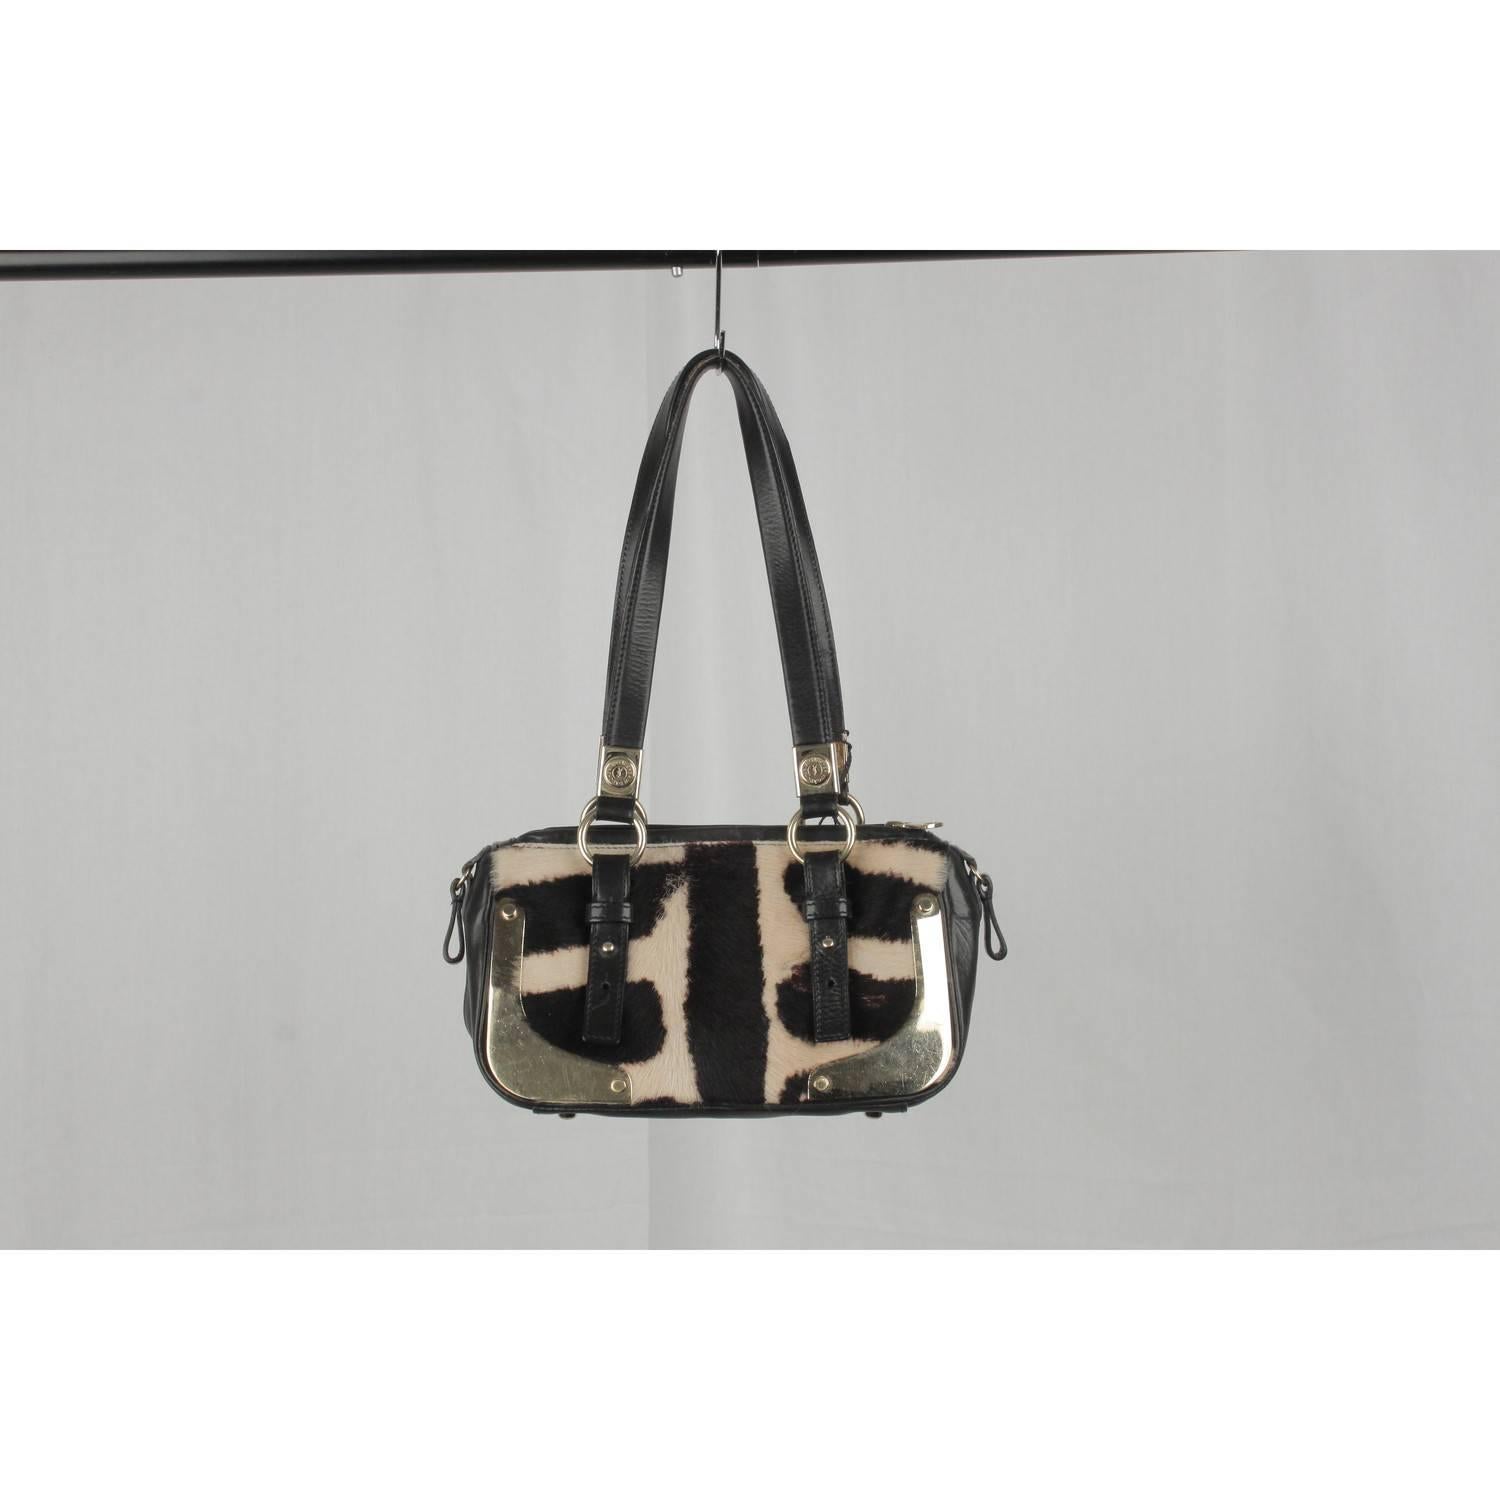 YVES SAINT LAURENT Pony Hair Leather HANDBAG Shoulder Bag In Excellent Condition In Rome, Rome